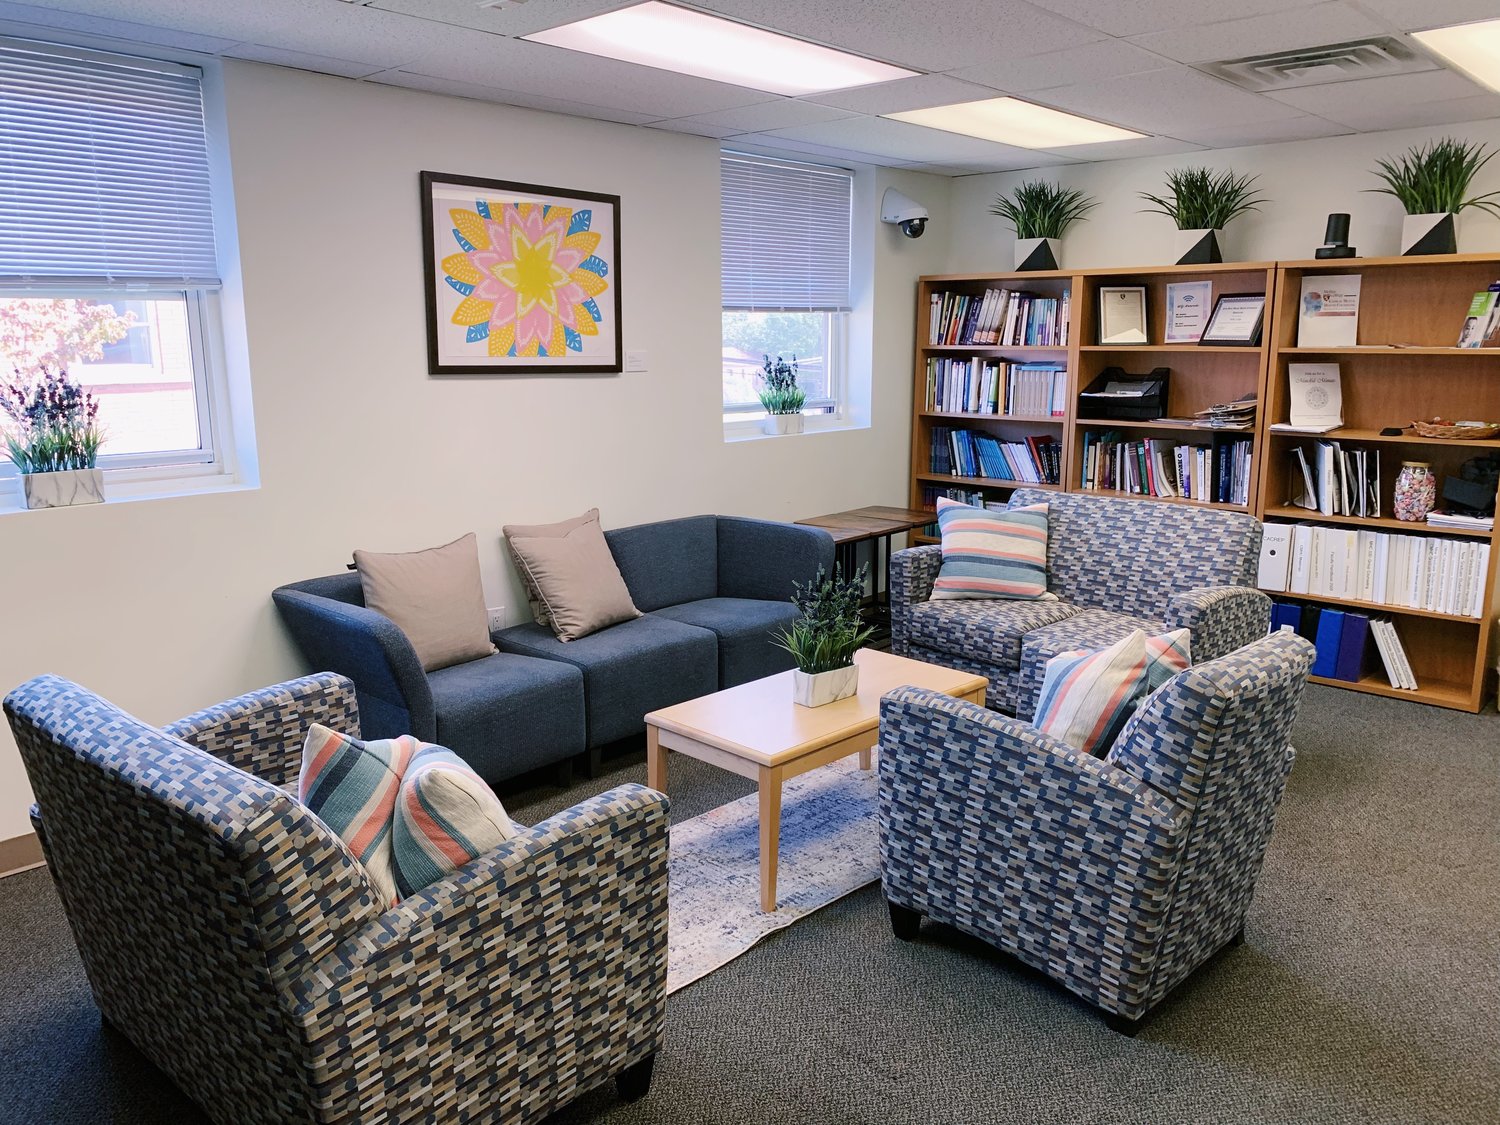 Though Molloy College’s Mental Health and Wellness Center is not seeing patients in person at this time, it offers tele-mental health services.